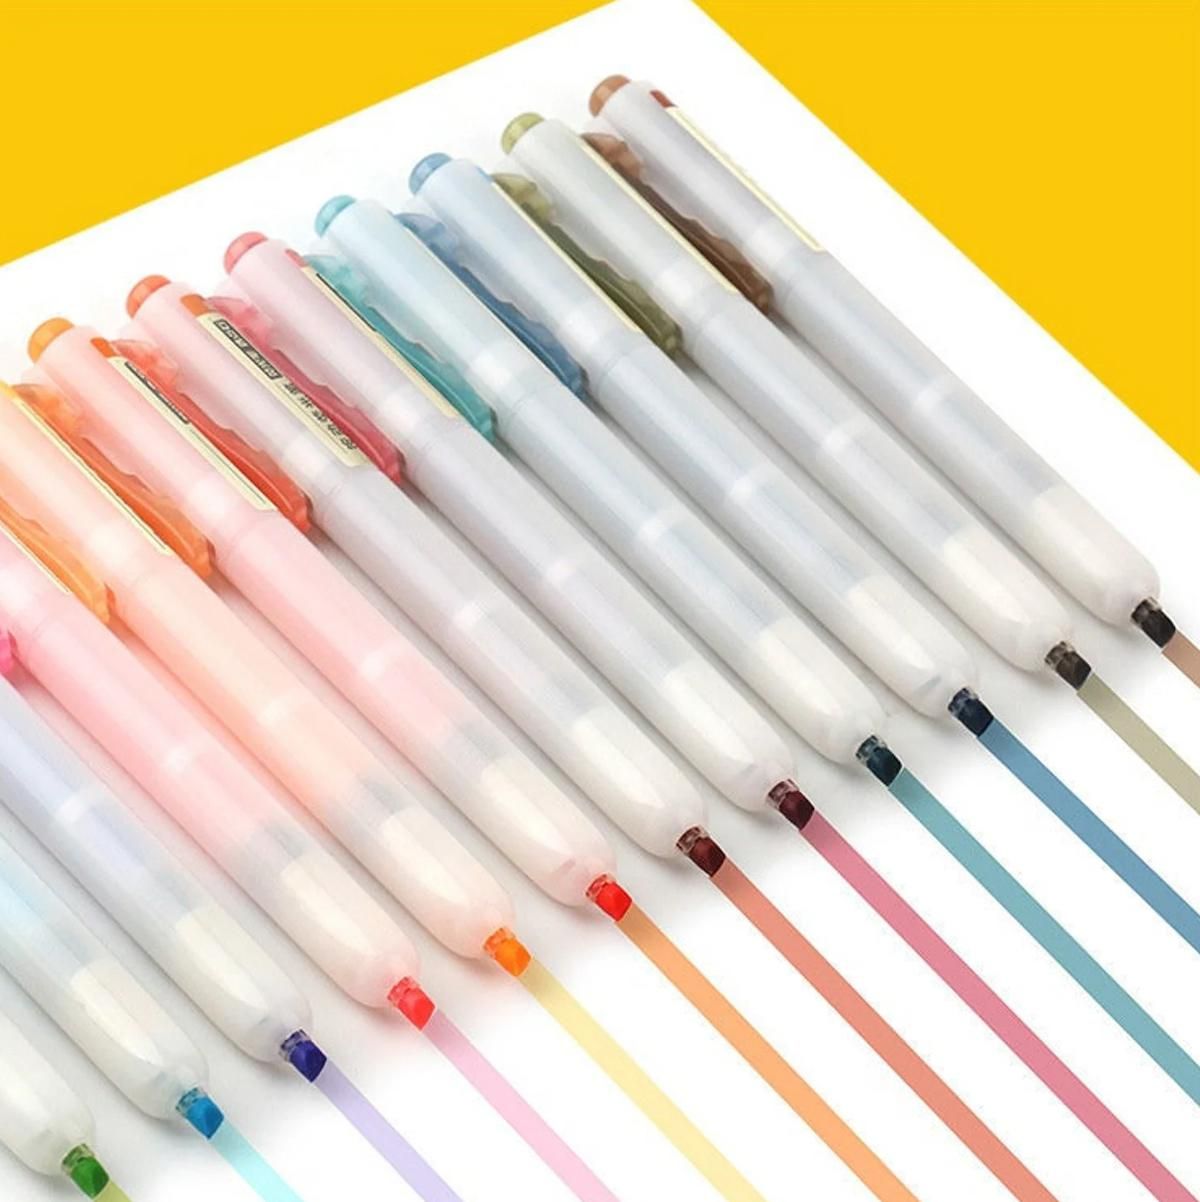 Colorful School Supplies That Will Actually Make You Want To Study